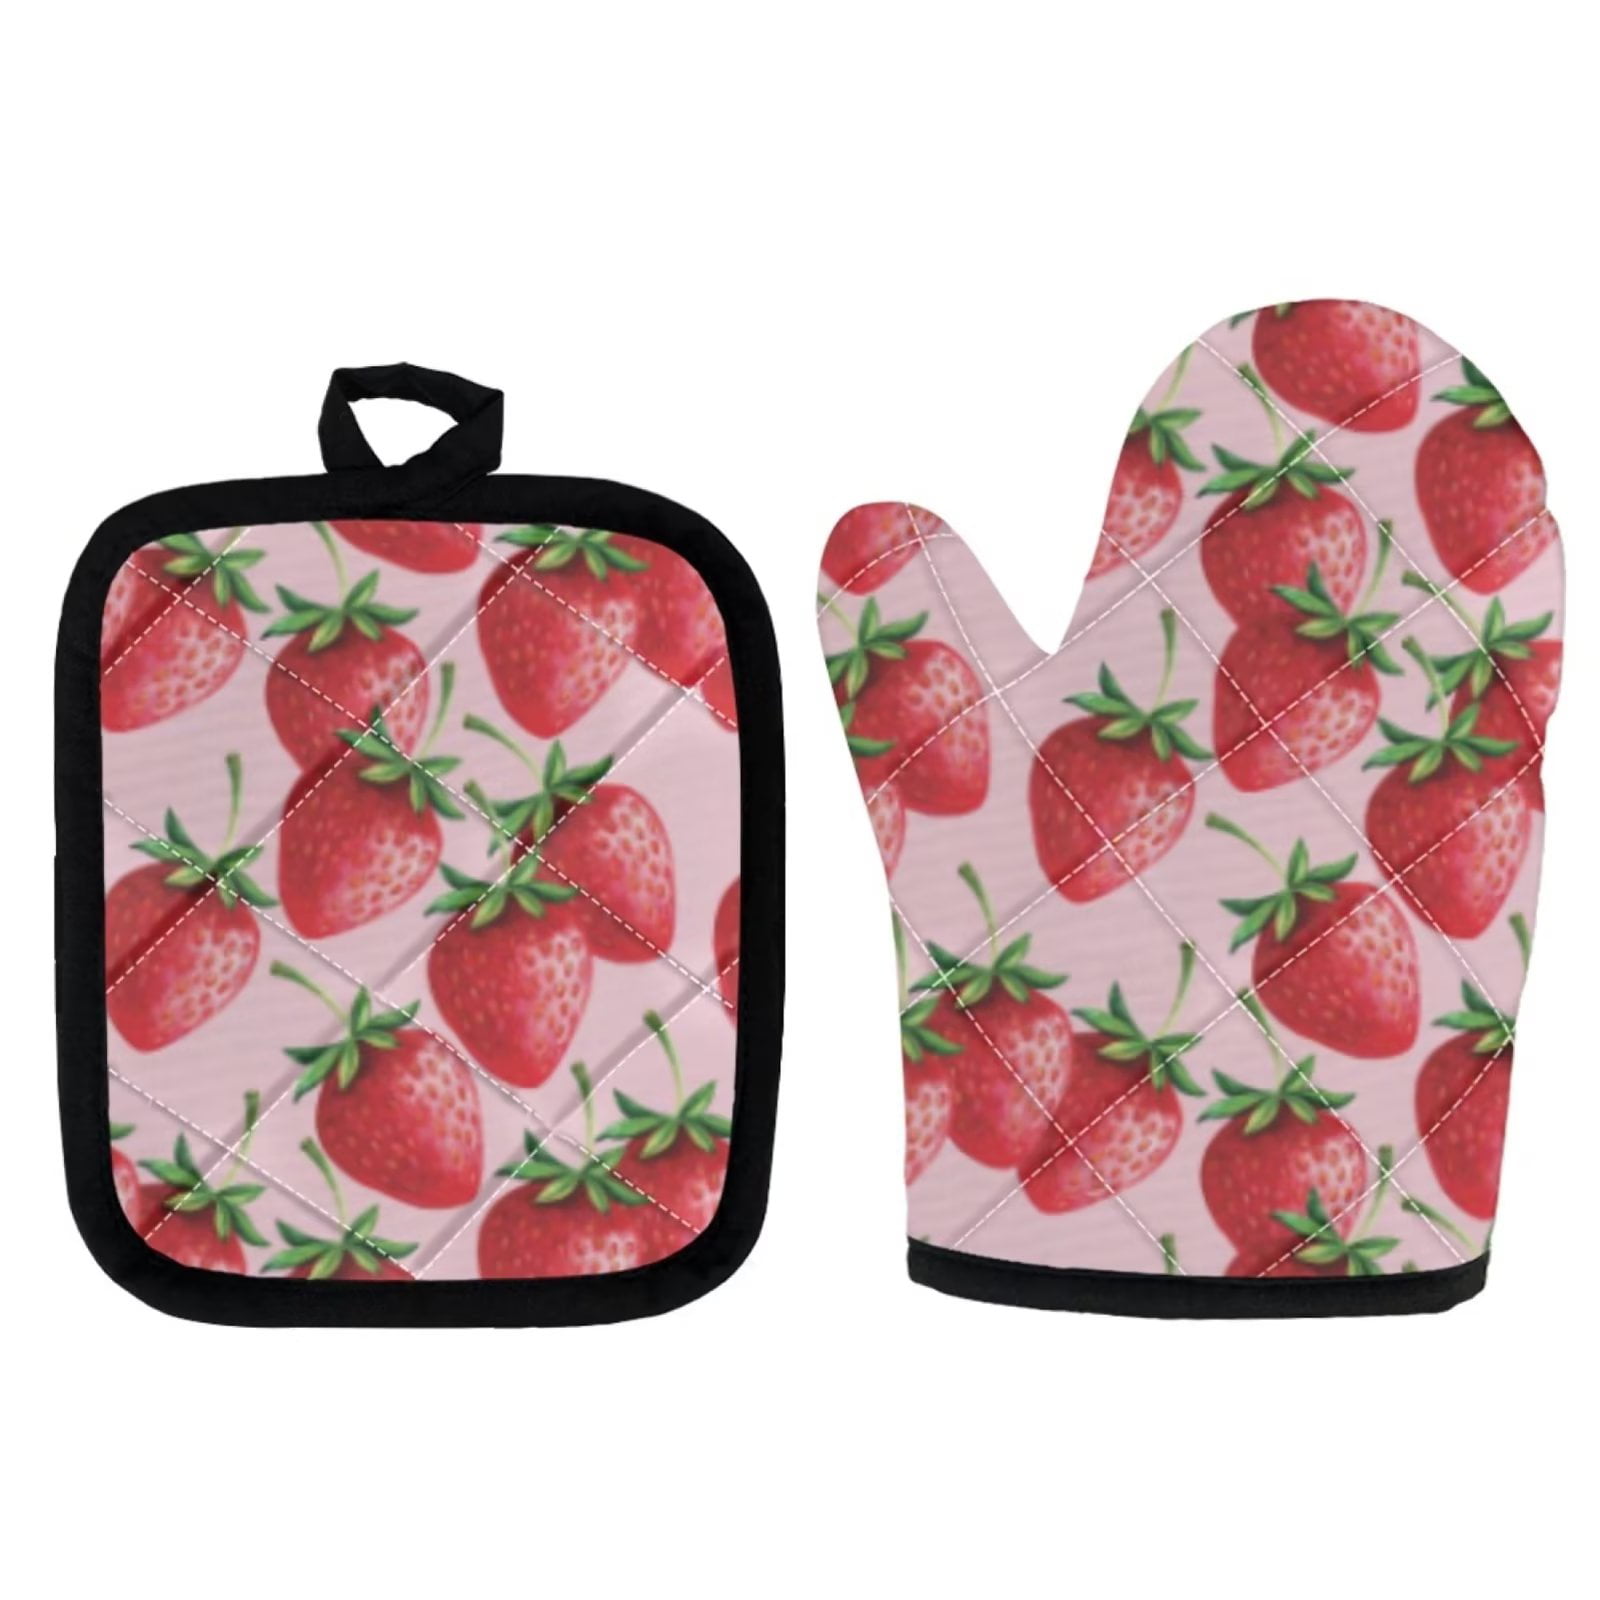 Strawberry Fingertip Oven Mitts